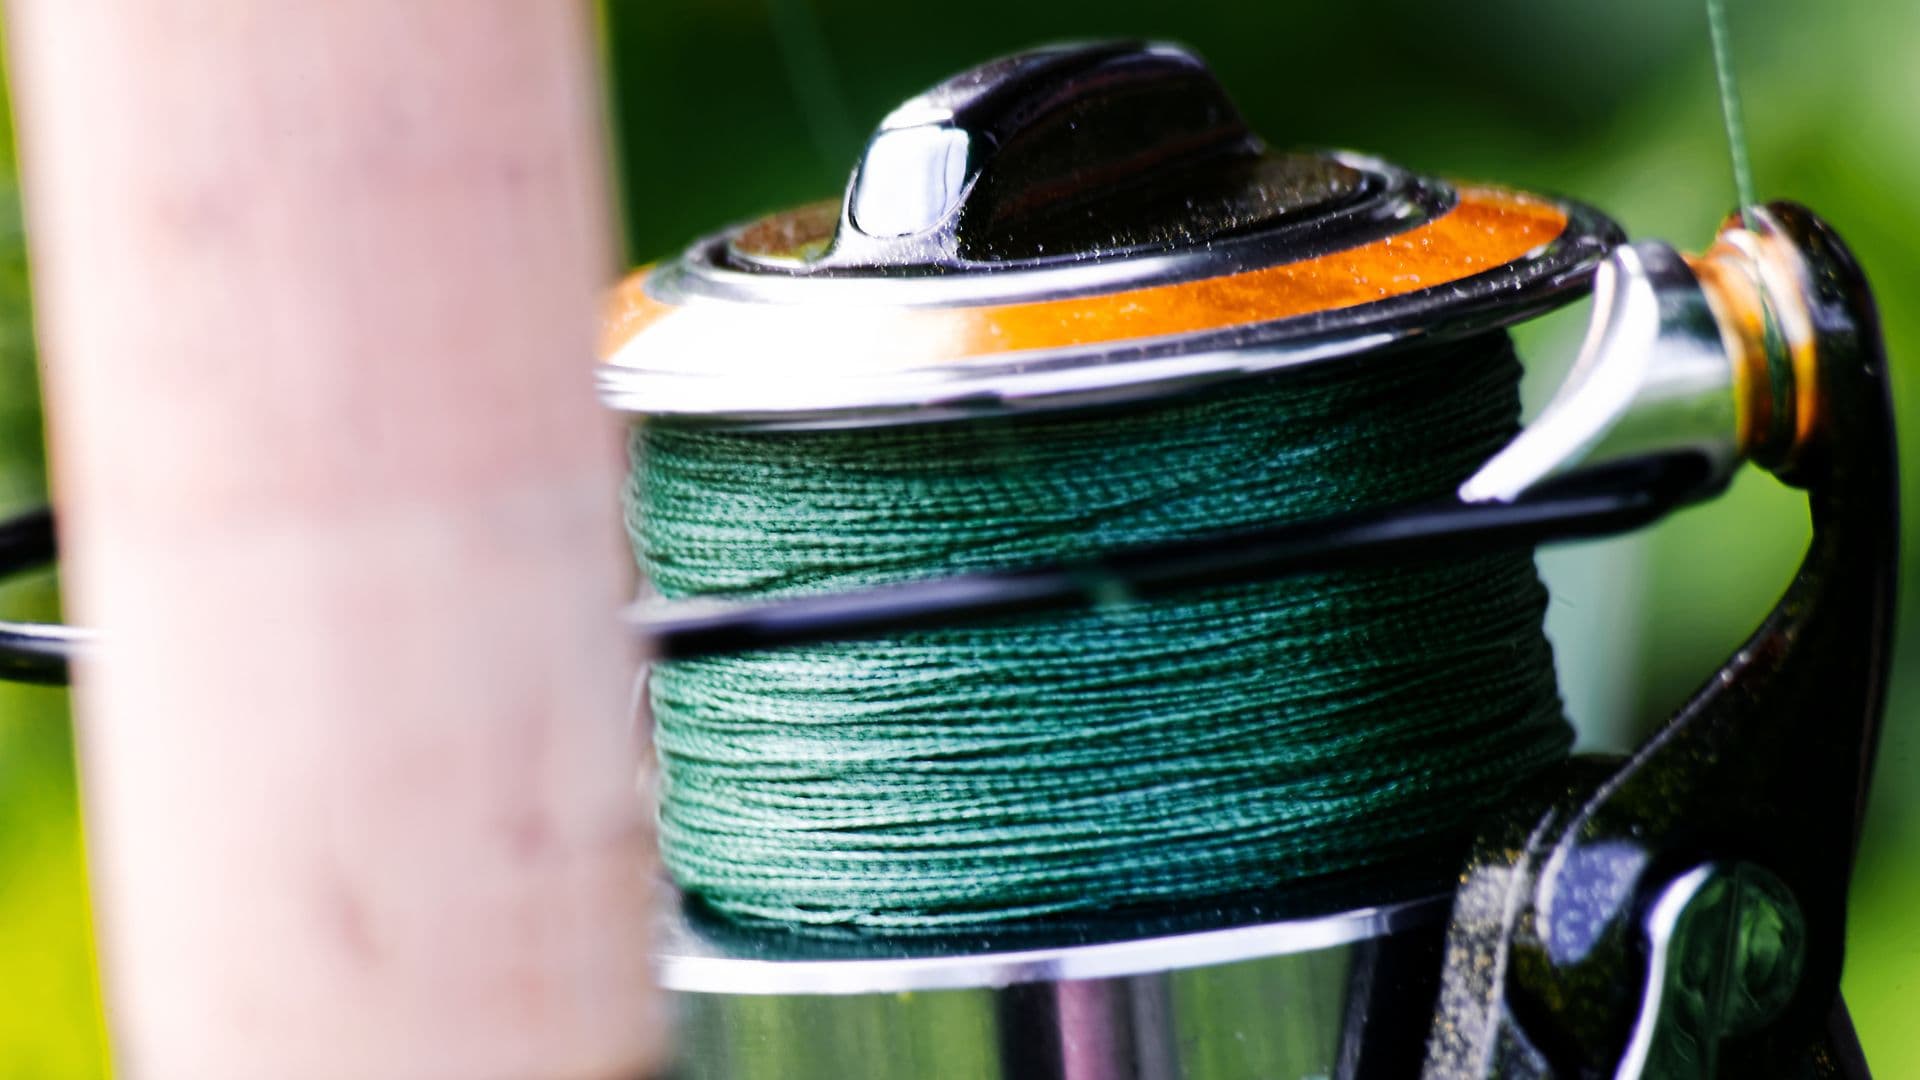 A close up image of braided fishing line spooled on a fishing reel.